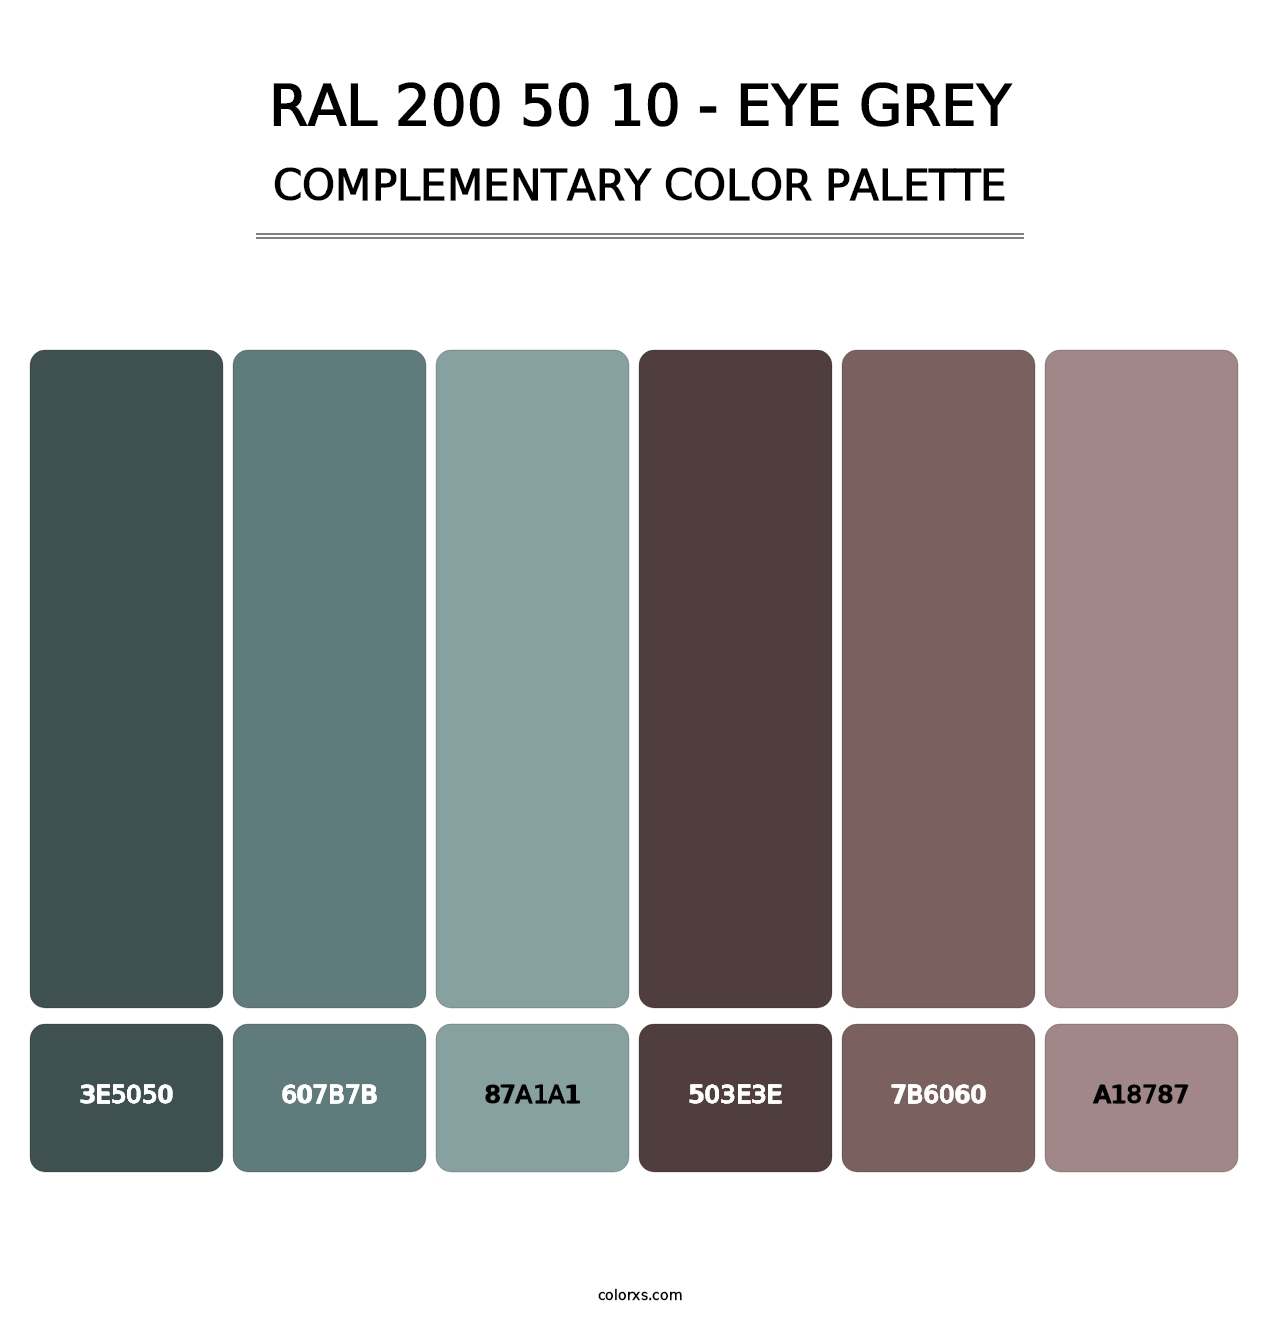 RAL 200 50 10 - Eye Grey - Complementary Color Palette